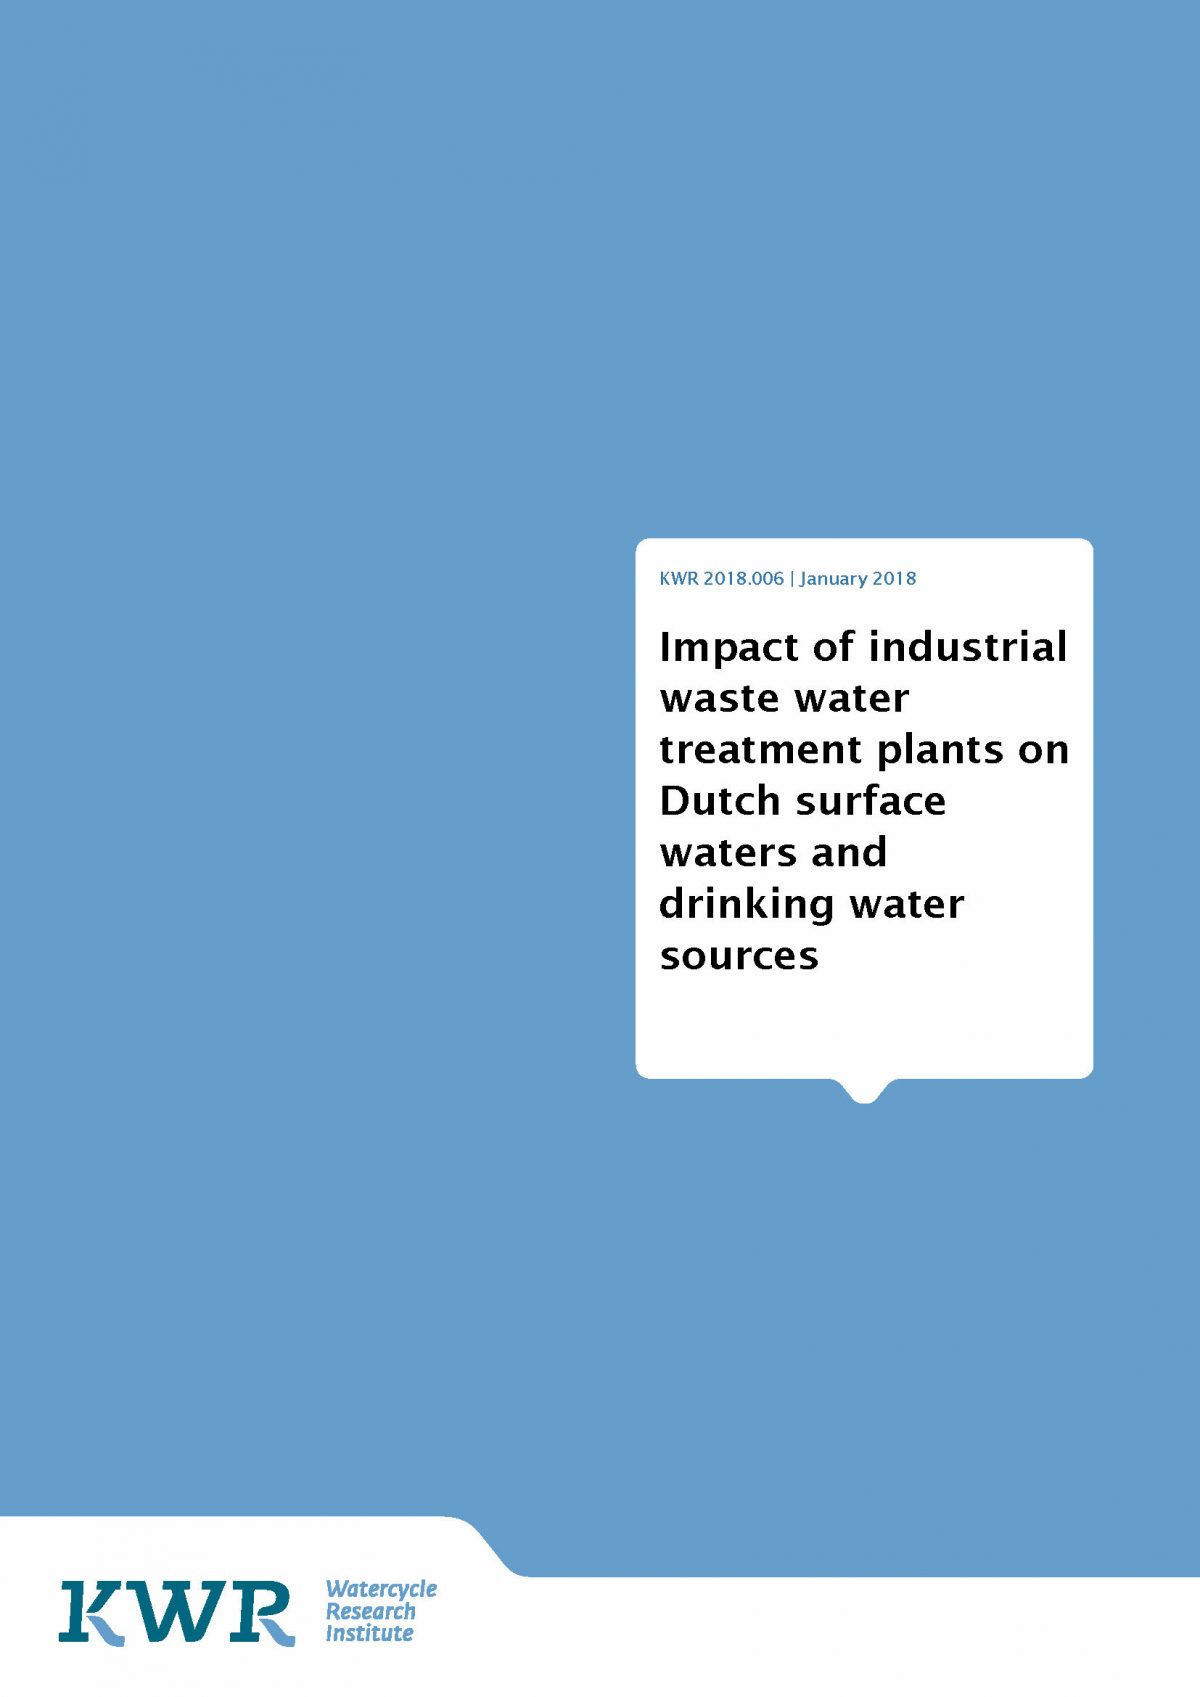 Impact of industrial waste water treatment plants on Dutch surface waters and drinking water sources